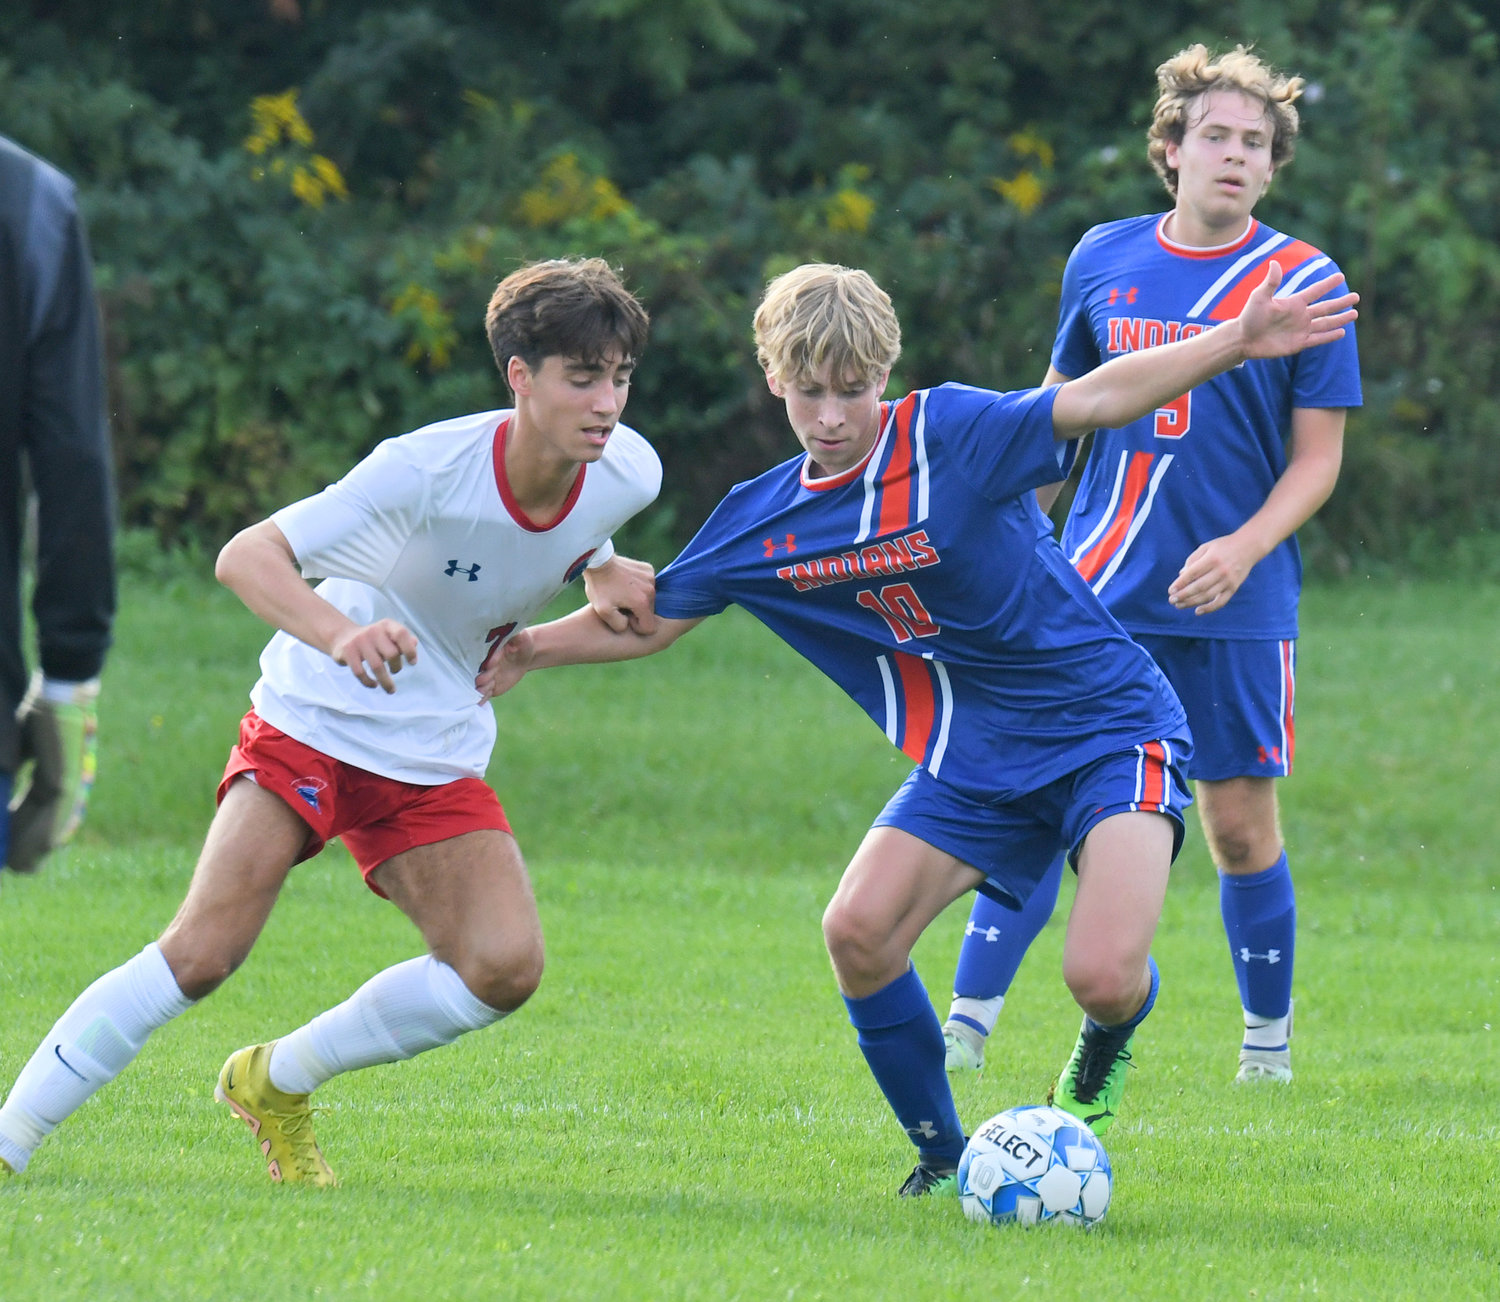 New Hartford's Ashton Giambrone and Oneida's Cash Kistner spar for the ball during the first half in Oneida on Tuesday afternoon.